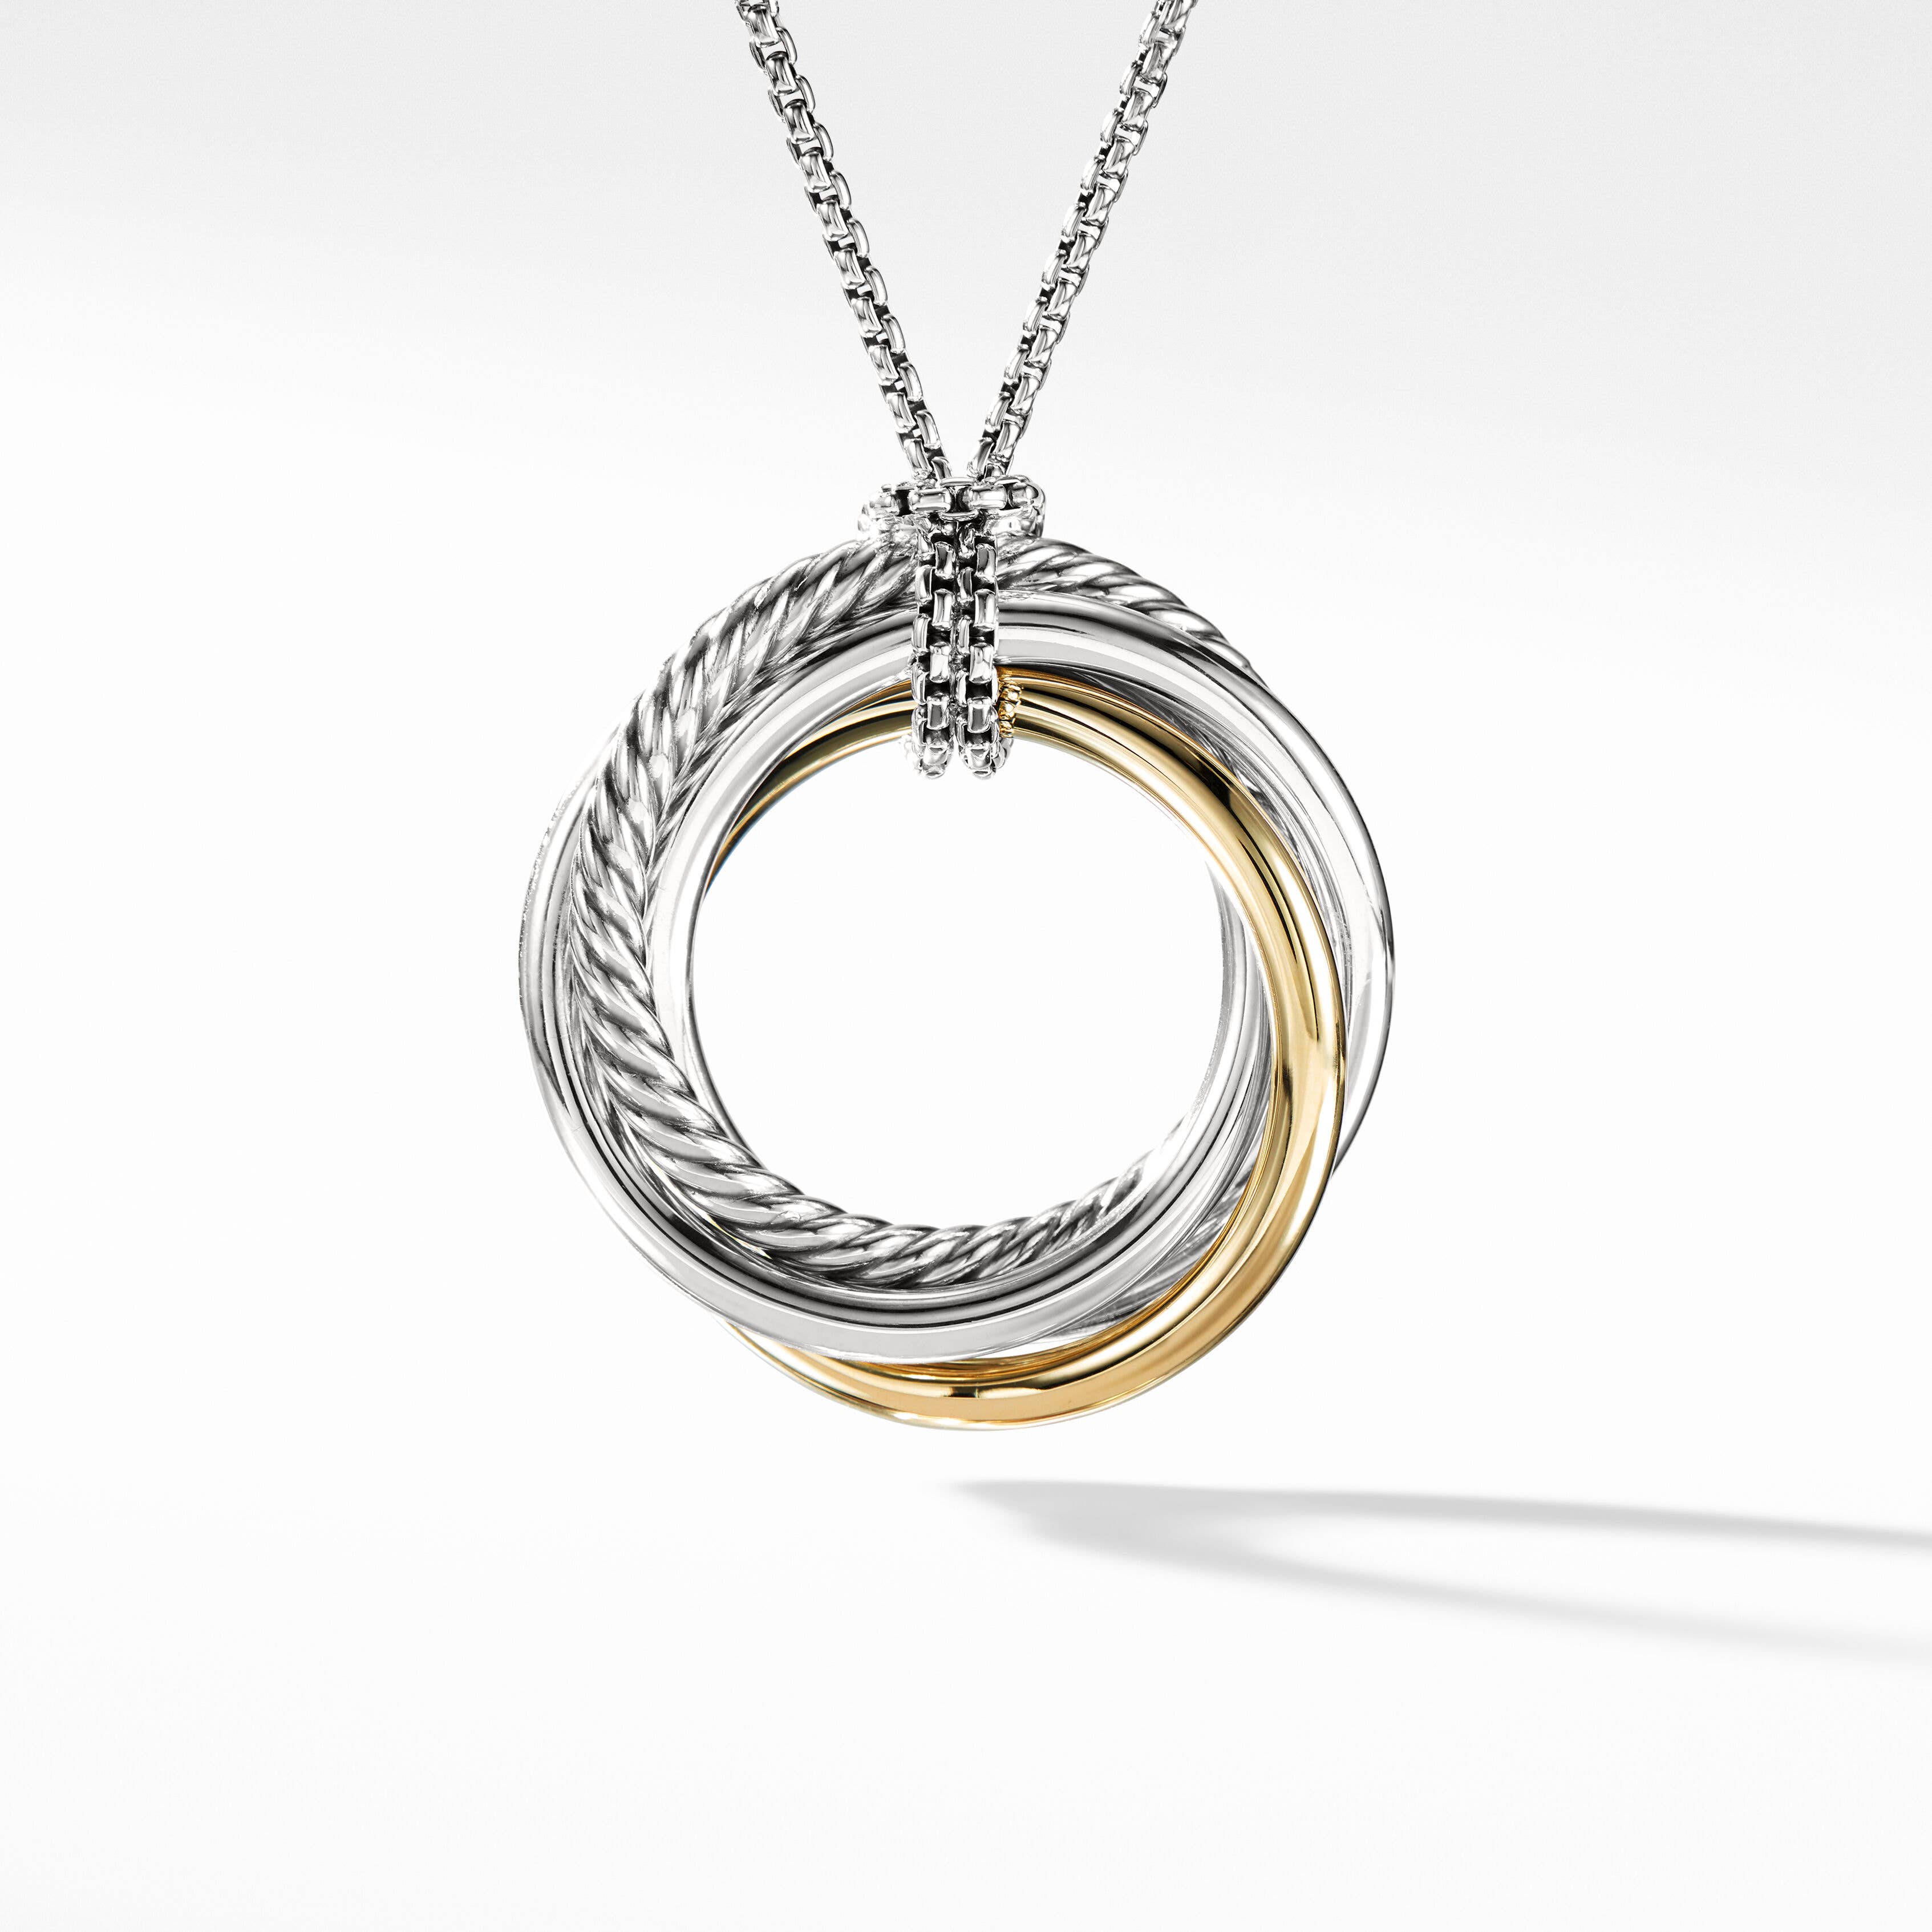 Crossover Pendant Necklace in Sterling Silver with 14K Yellow Gold